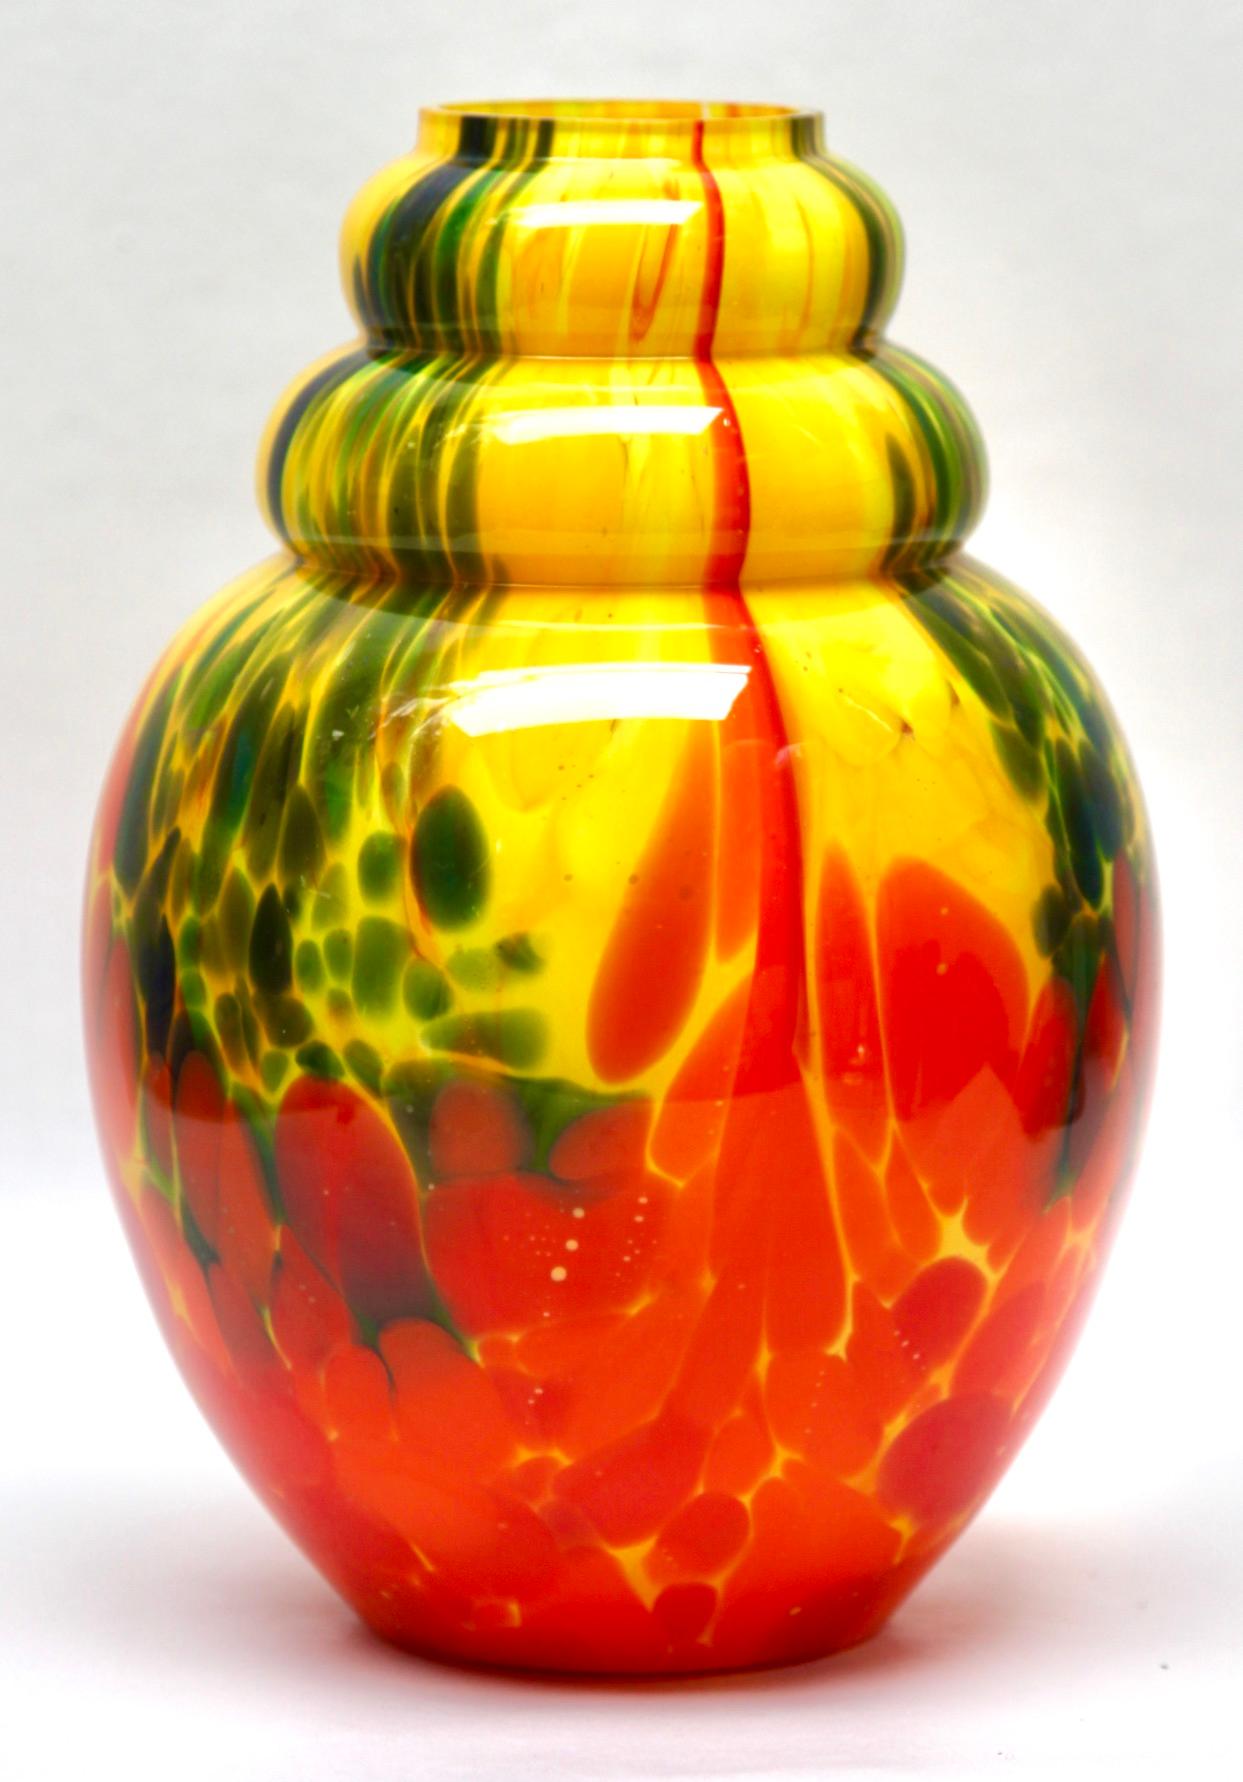 Scailmont - Art Deco vase in colorful multiple layered glass

Documentation can be found in the book of Les Verreries de Scailmont
a l epoque Art Deco. To view on last picture.

These glass pieces made in Belgium during the Art Deco period have